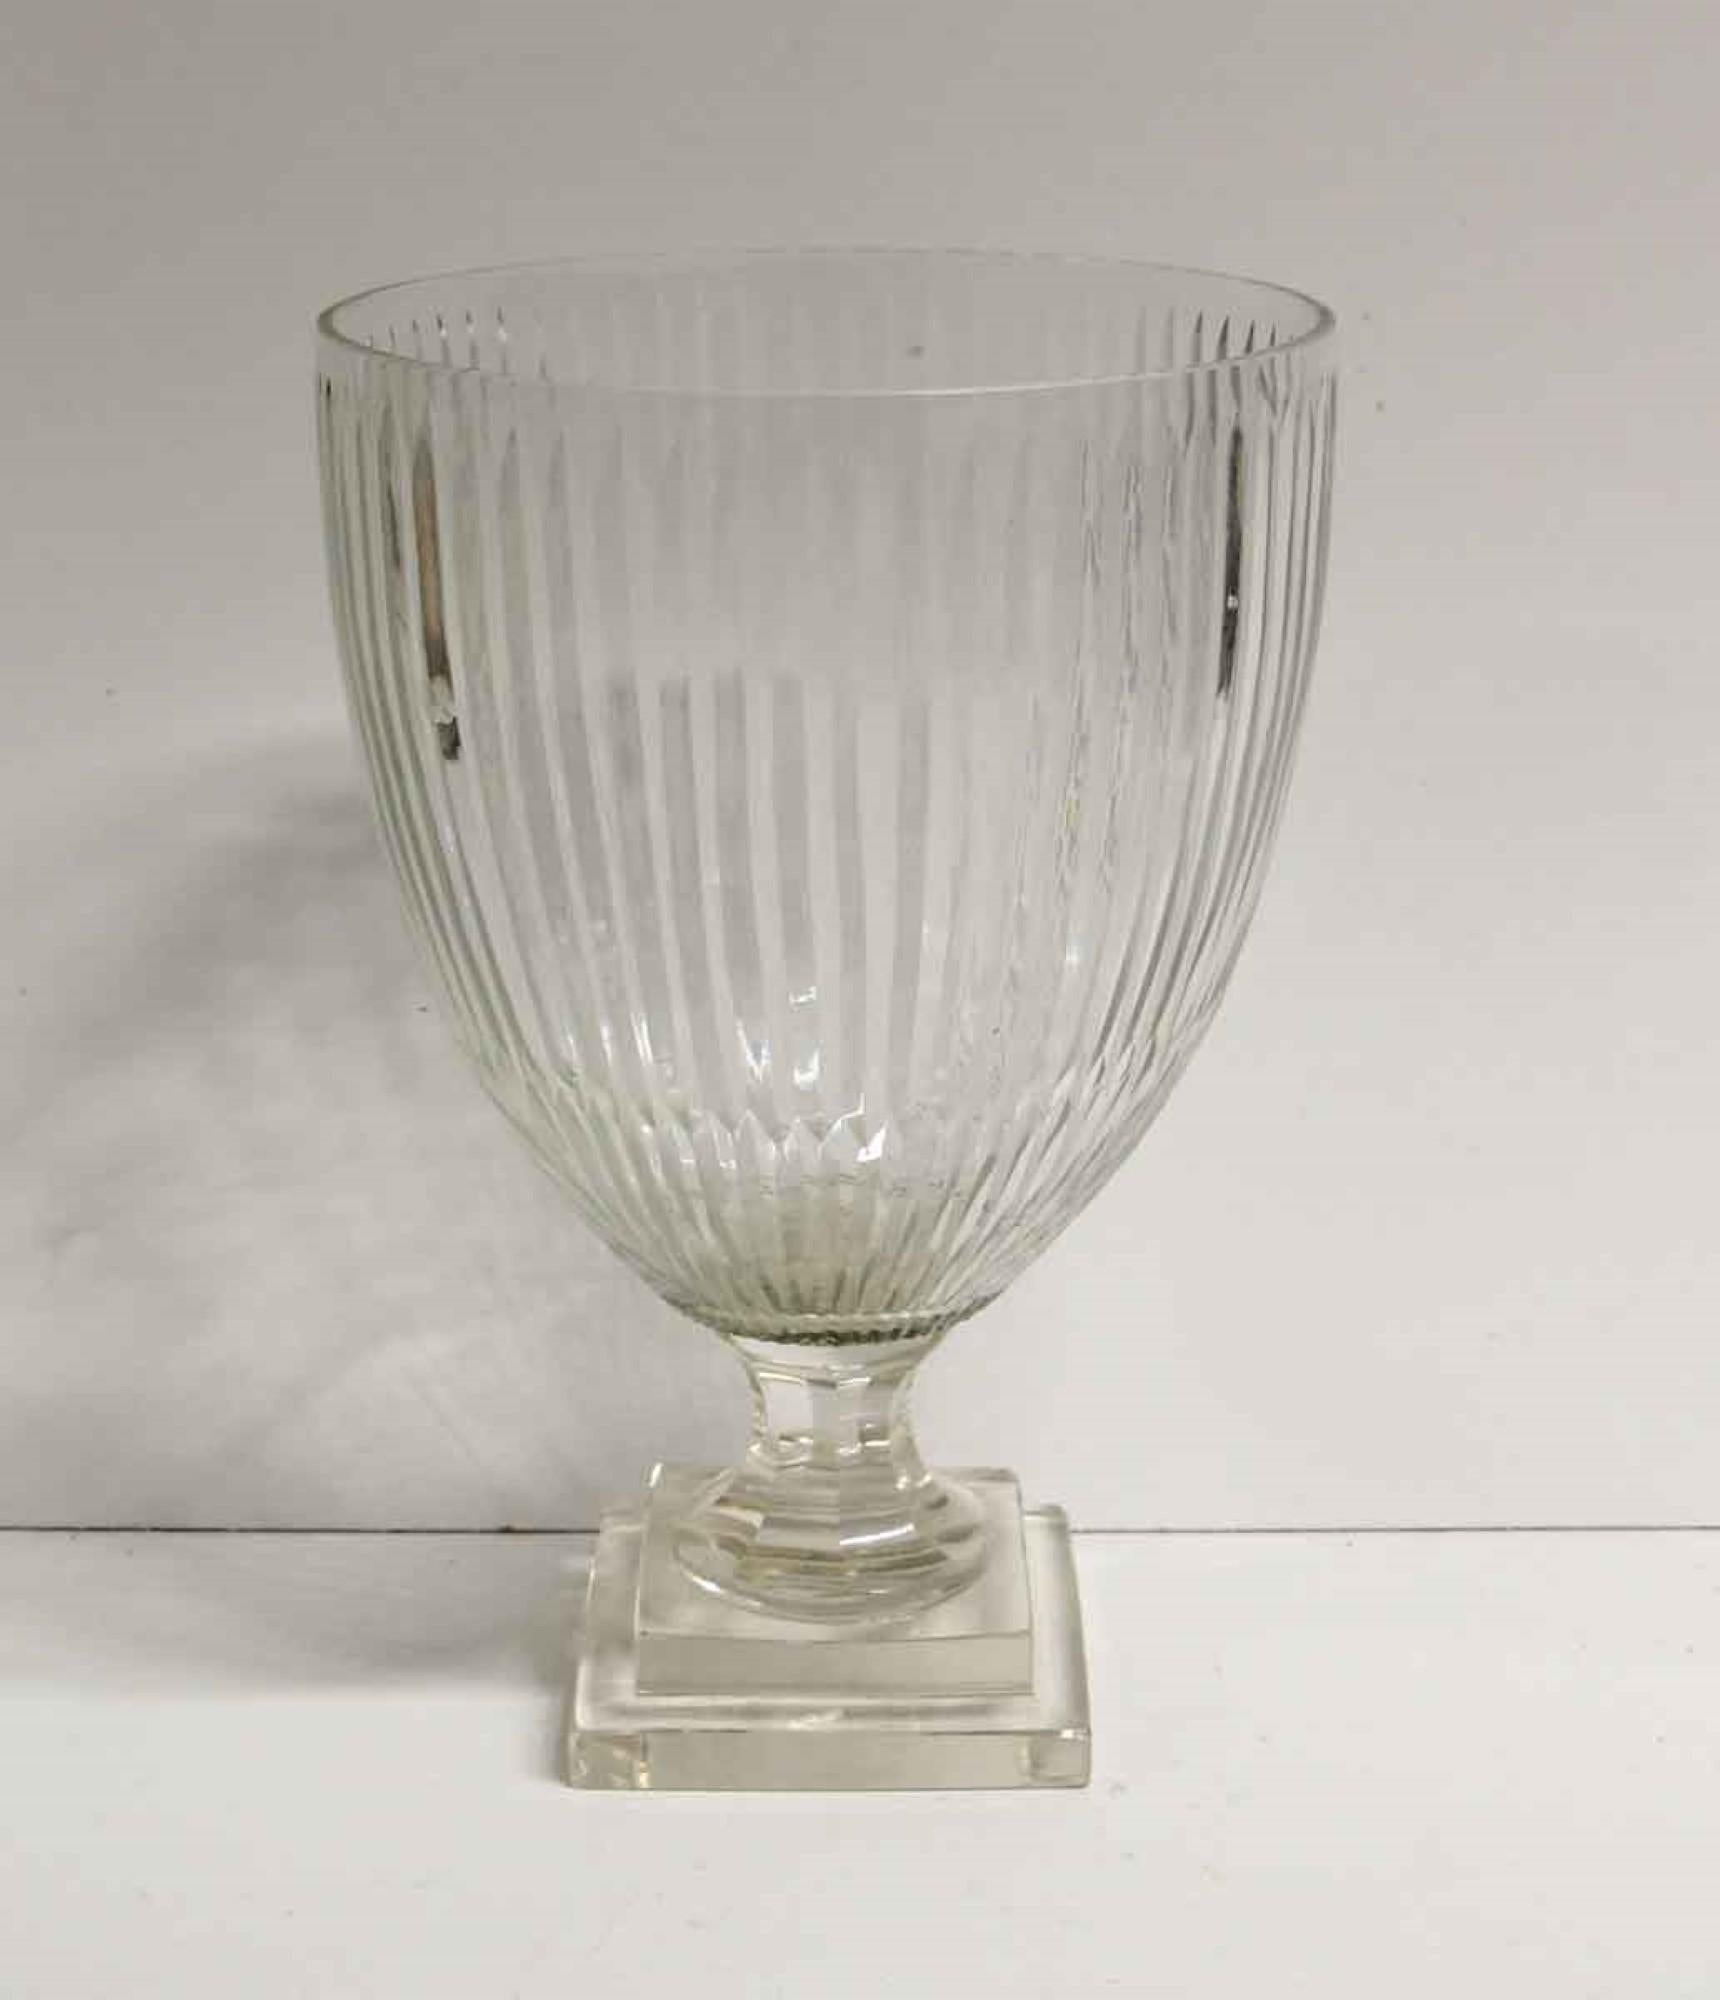 2000s clear etched glass fluted vase with a 2 tier stepped square base. Small quantity available at time of posting. Please inquire. Priced each. Please note, this item is located in one of our NYC locations.
